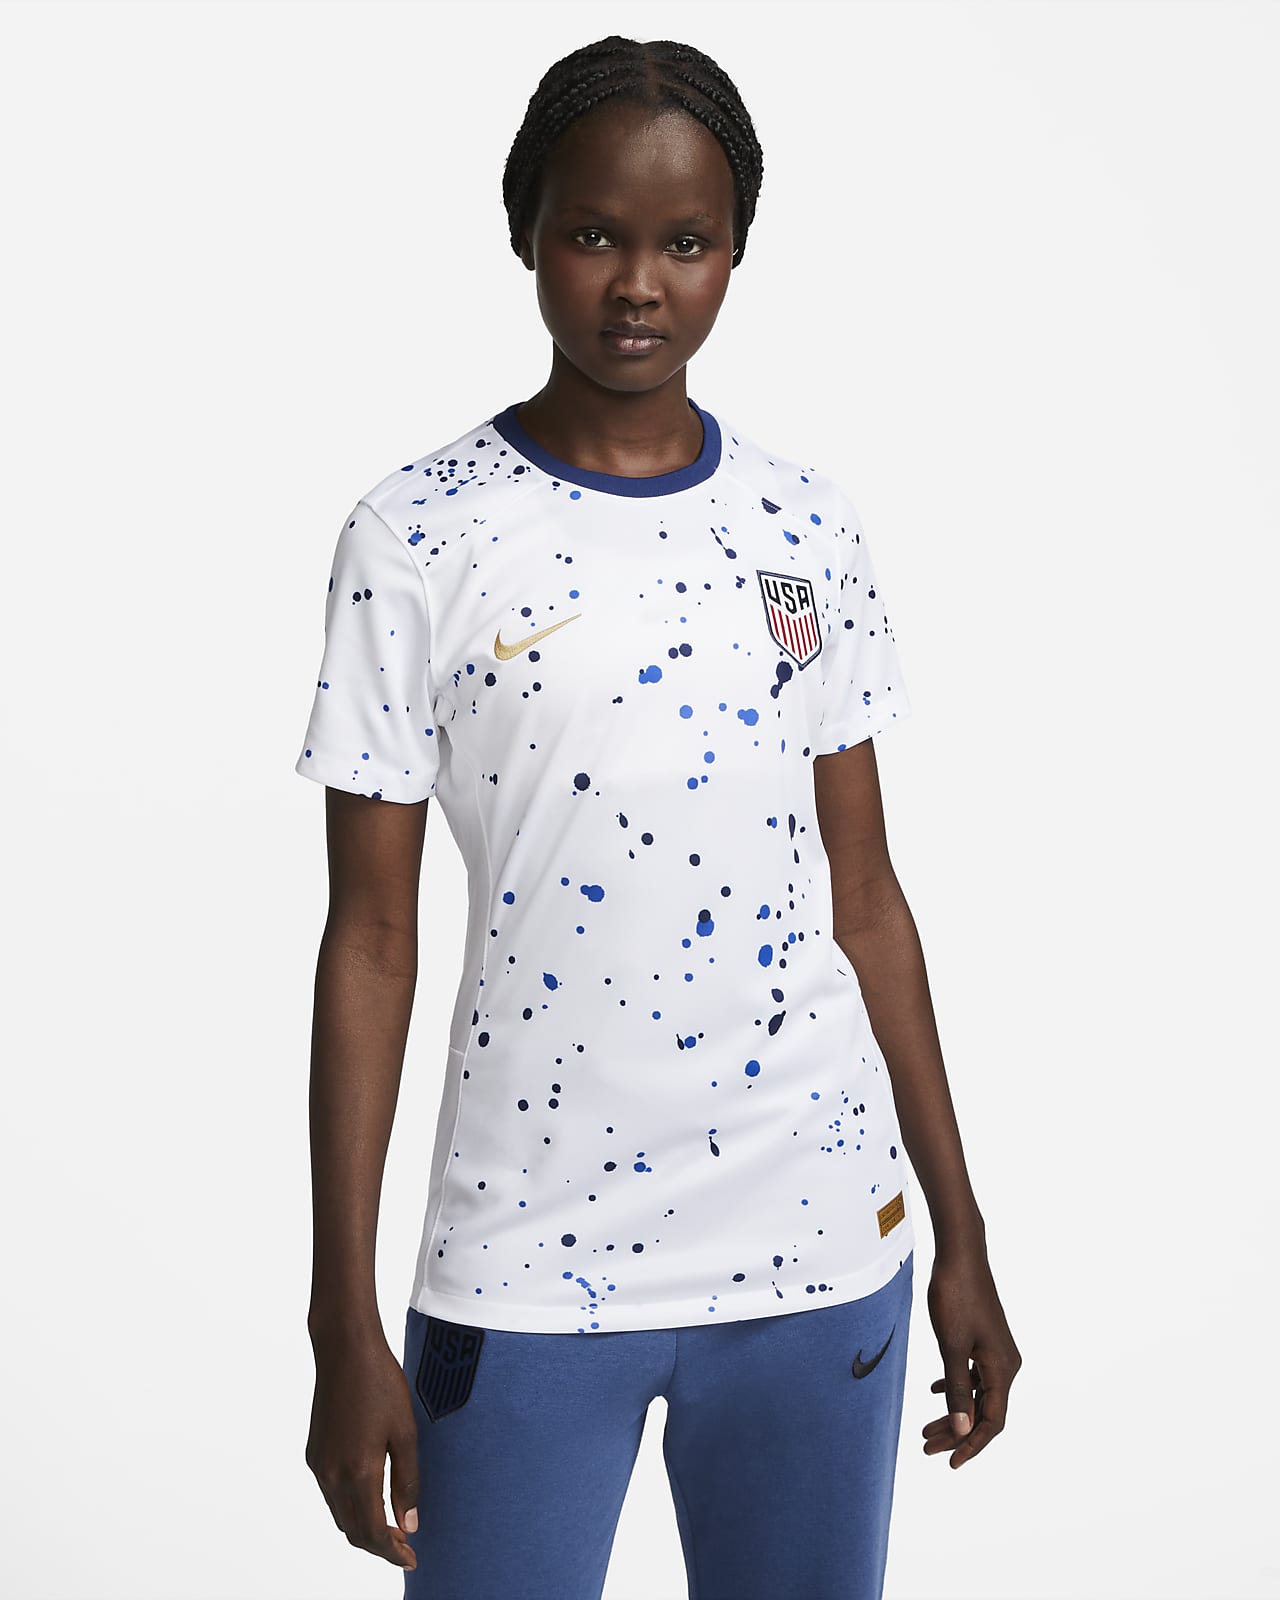 nike united states soccer jersey